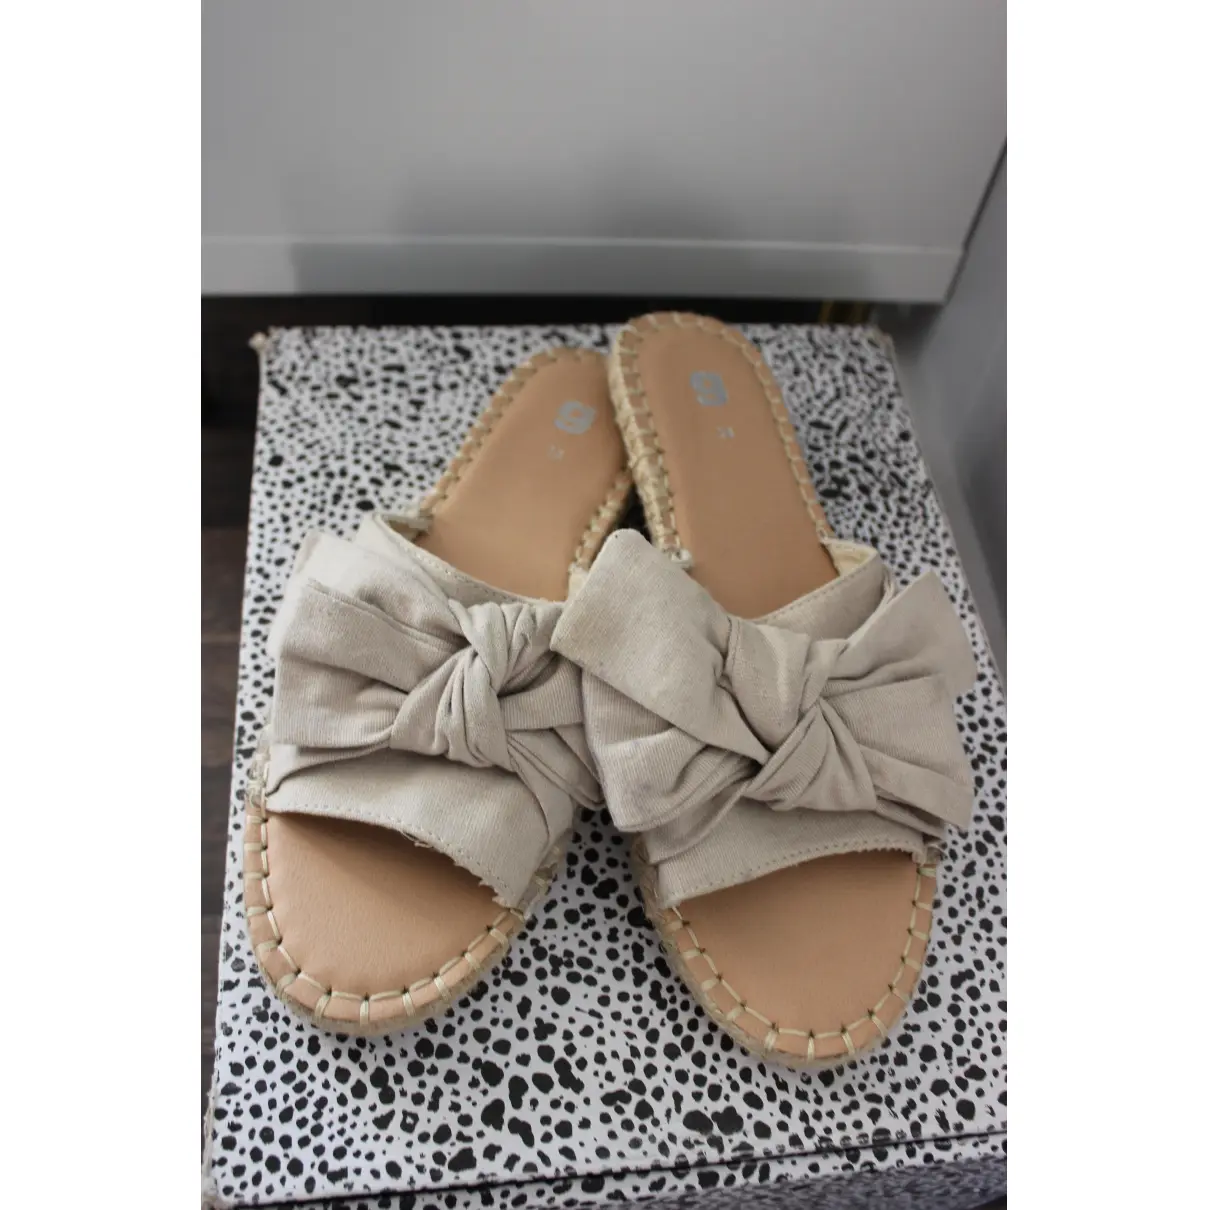 Buy GINA TRICOT Sandals online